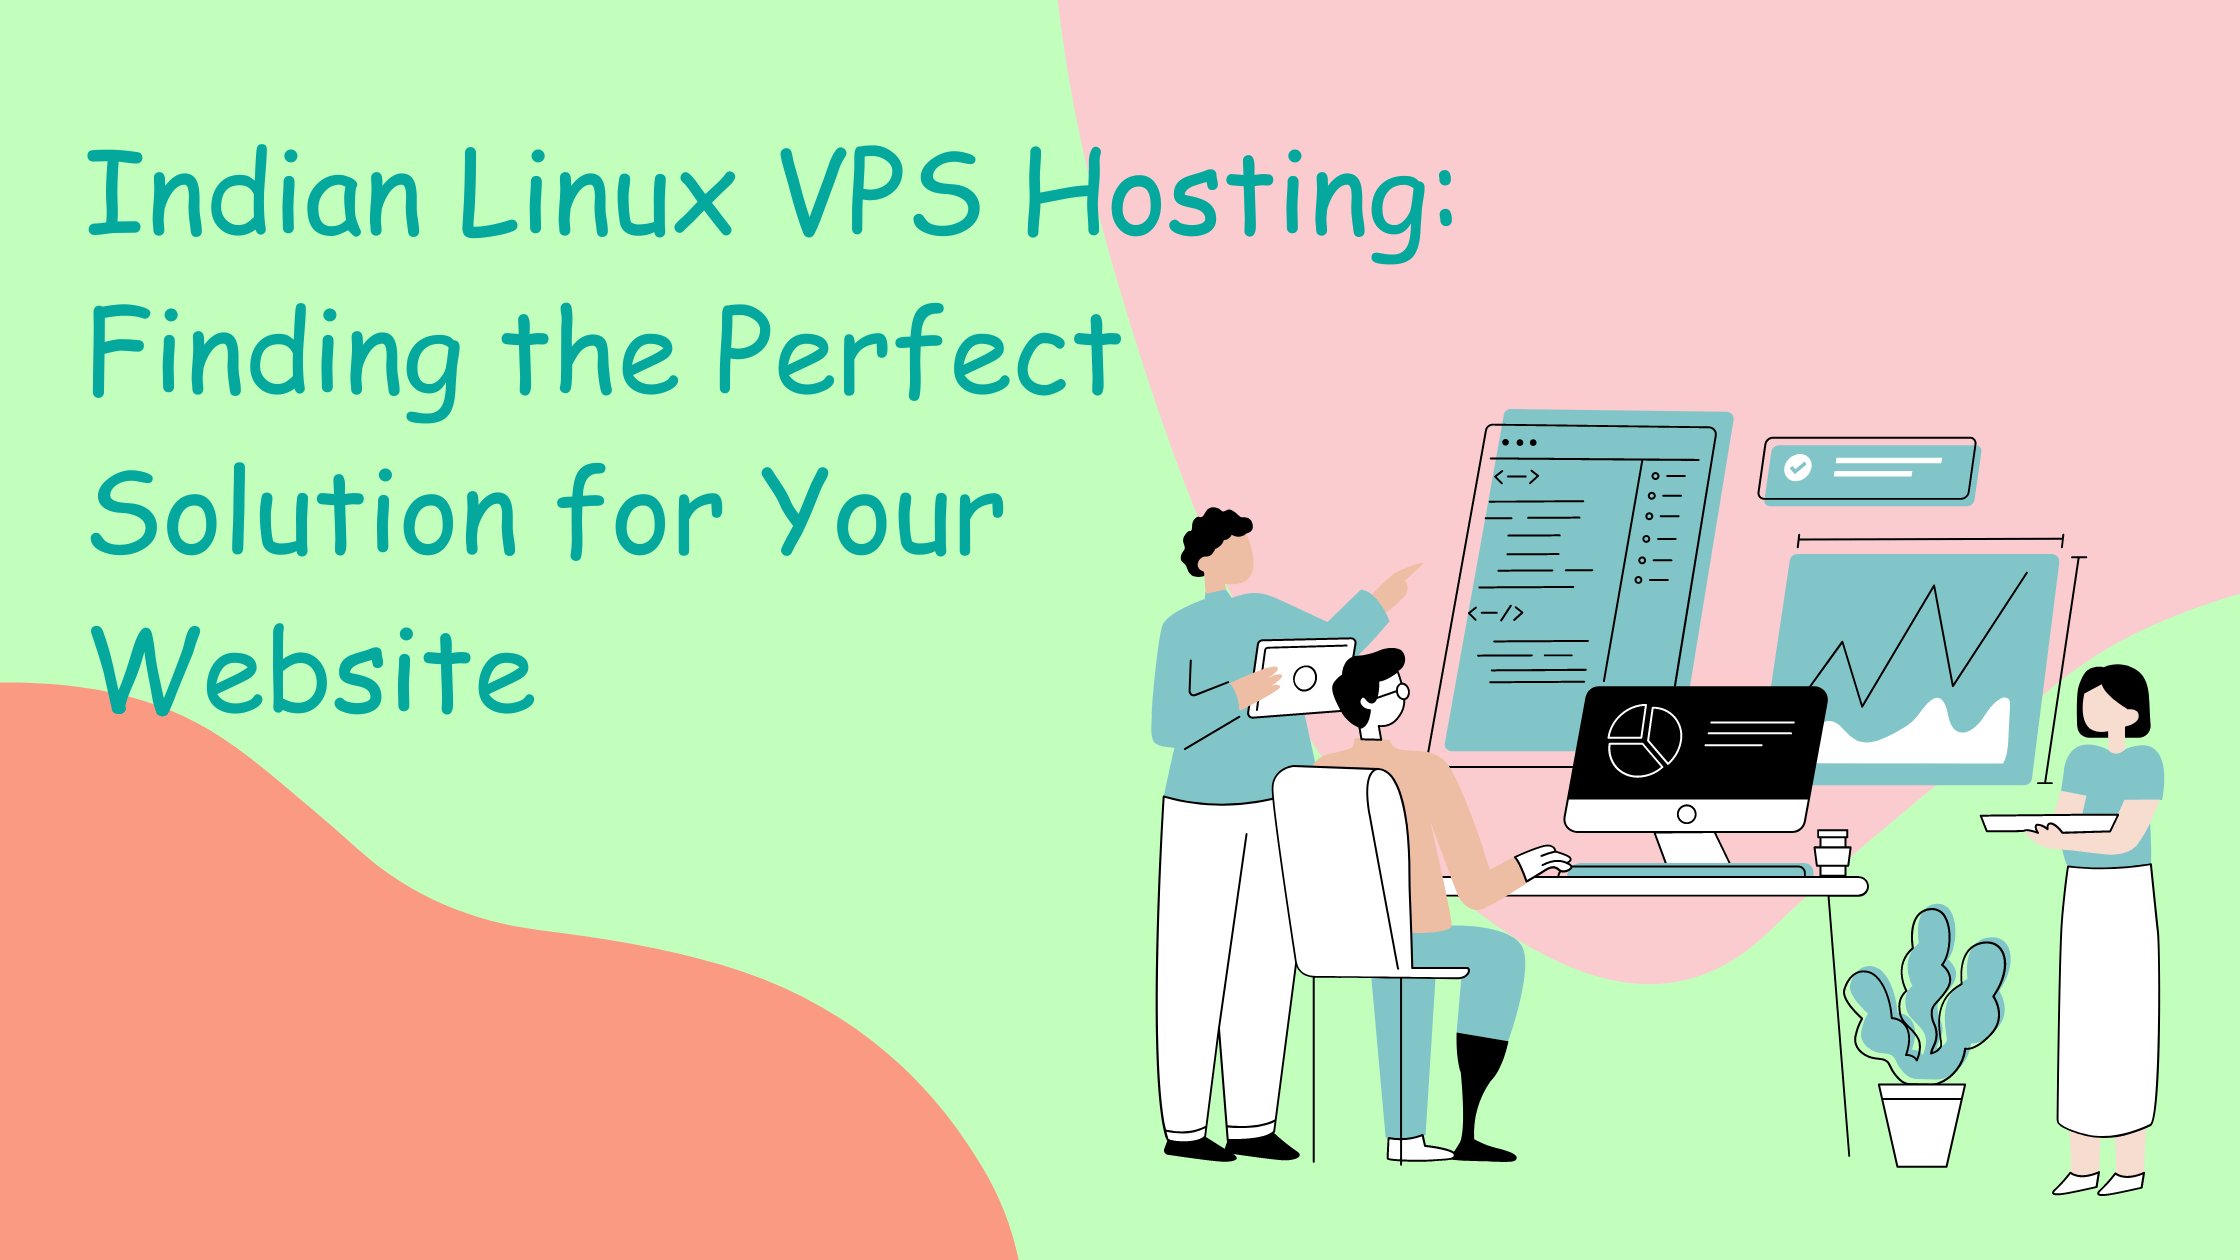 Indian Linux VPS Hosting: Finding the Perfect Solution for Your Website